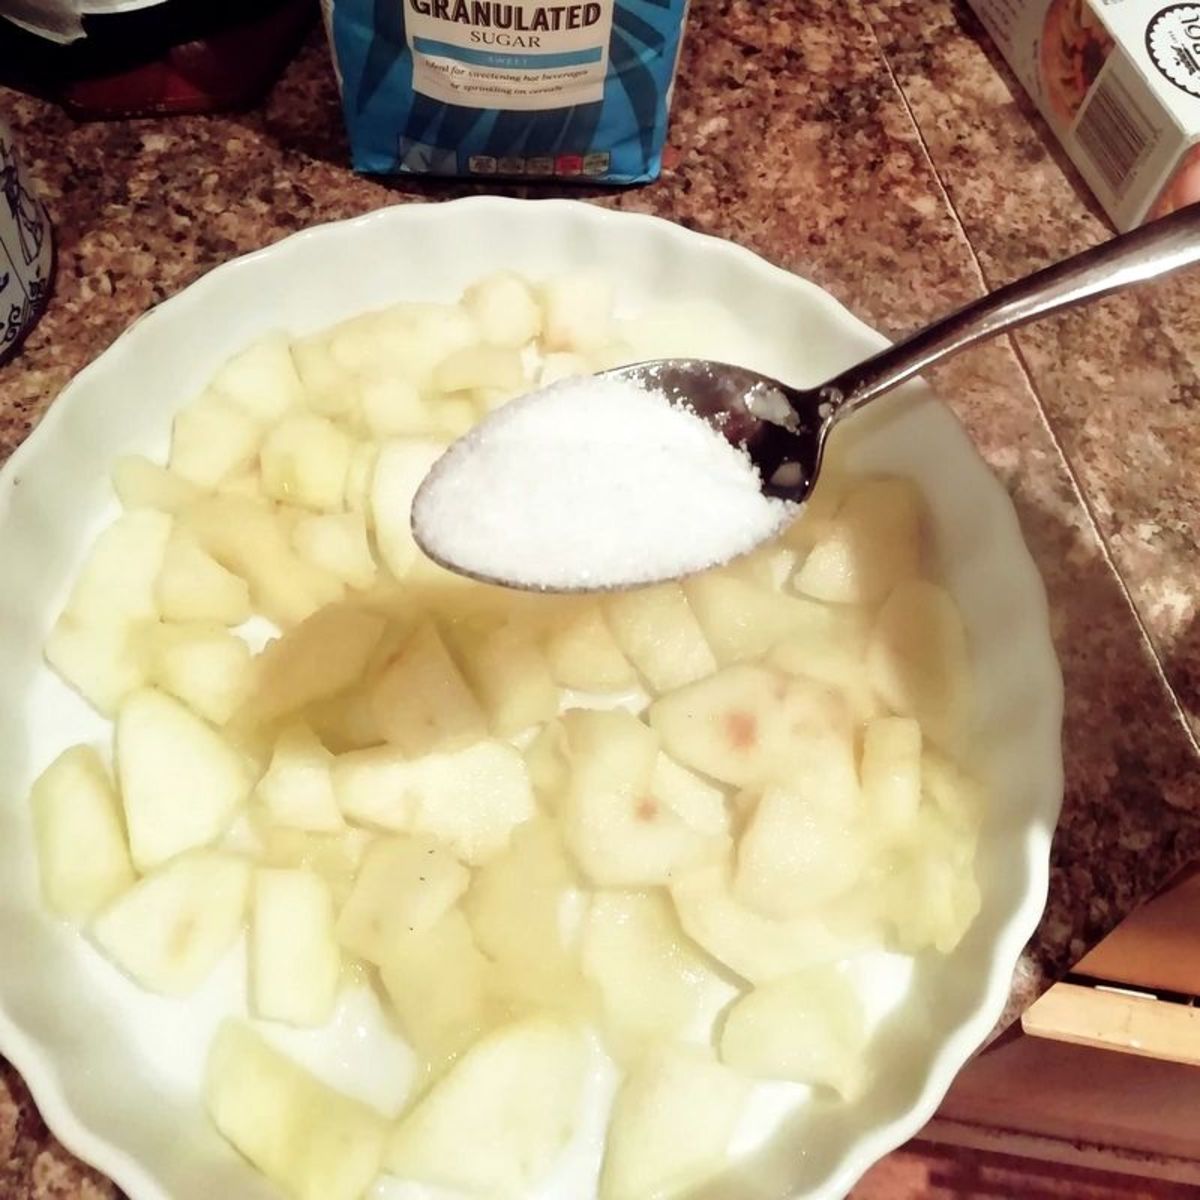 Add the white sugar and mix into the apple pieces.